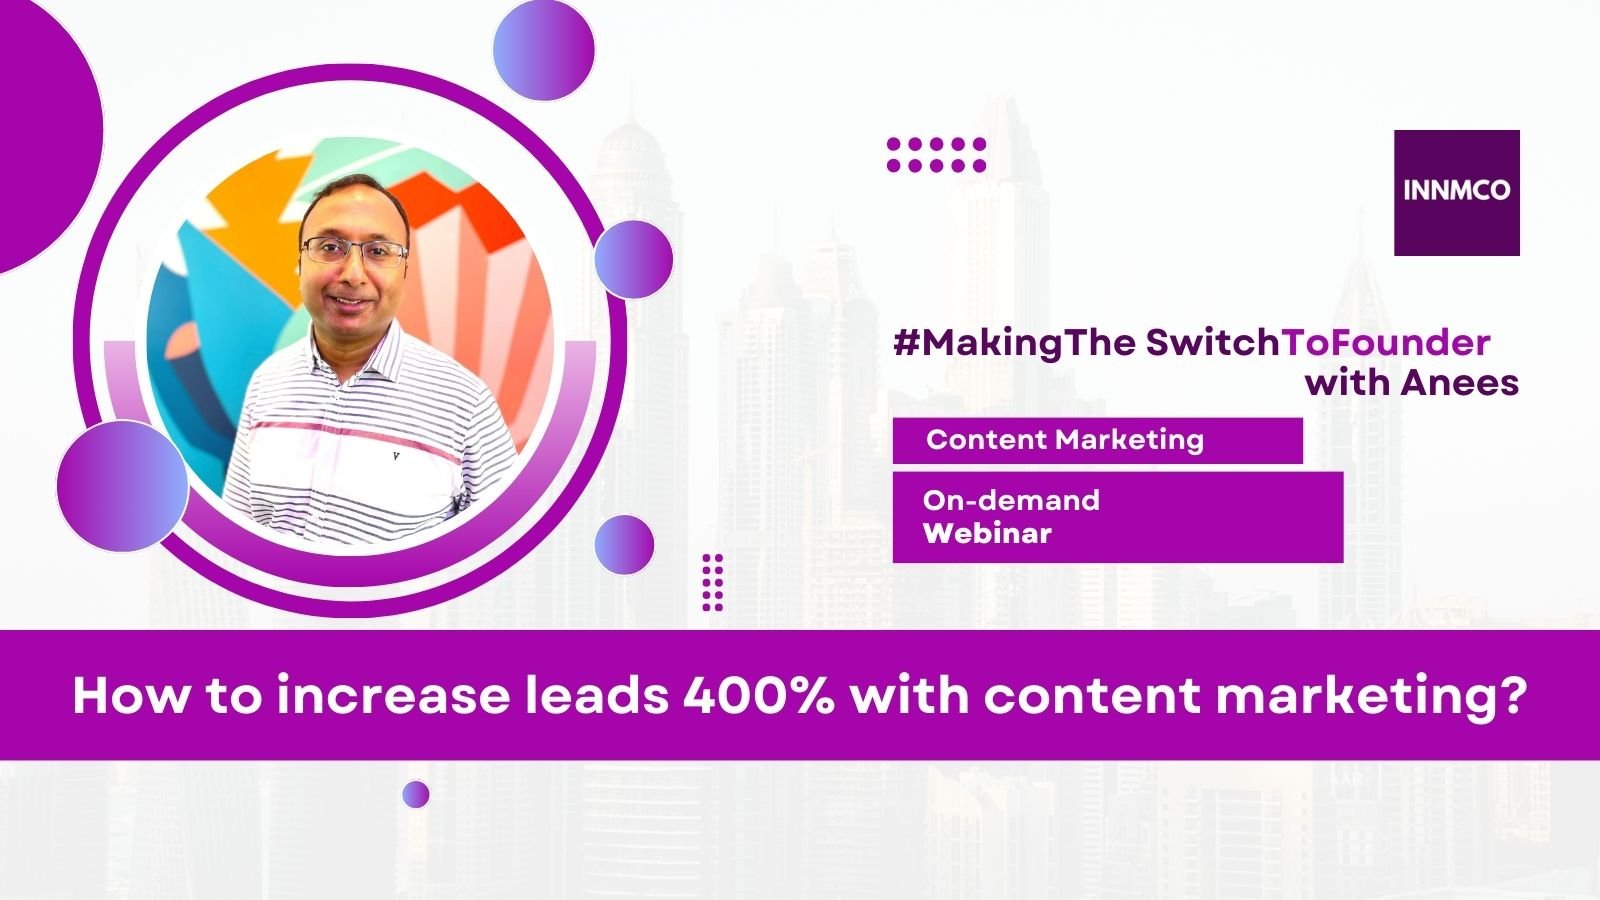 INNMCO On-demand Webinar - Content Marketing Banner 2023 - How to increase leads 400% with content marketing